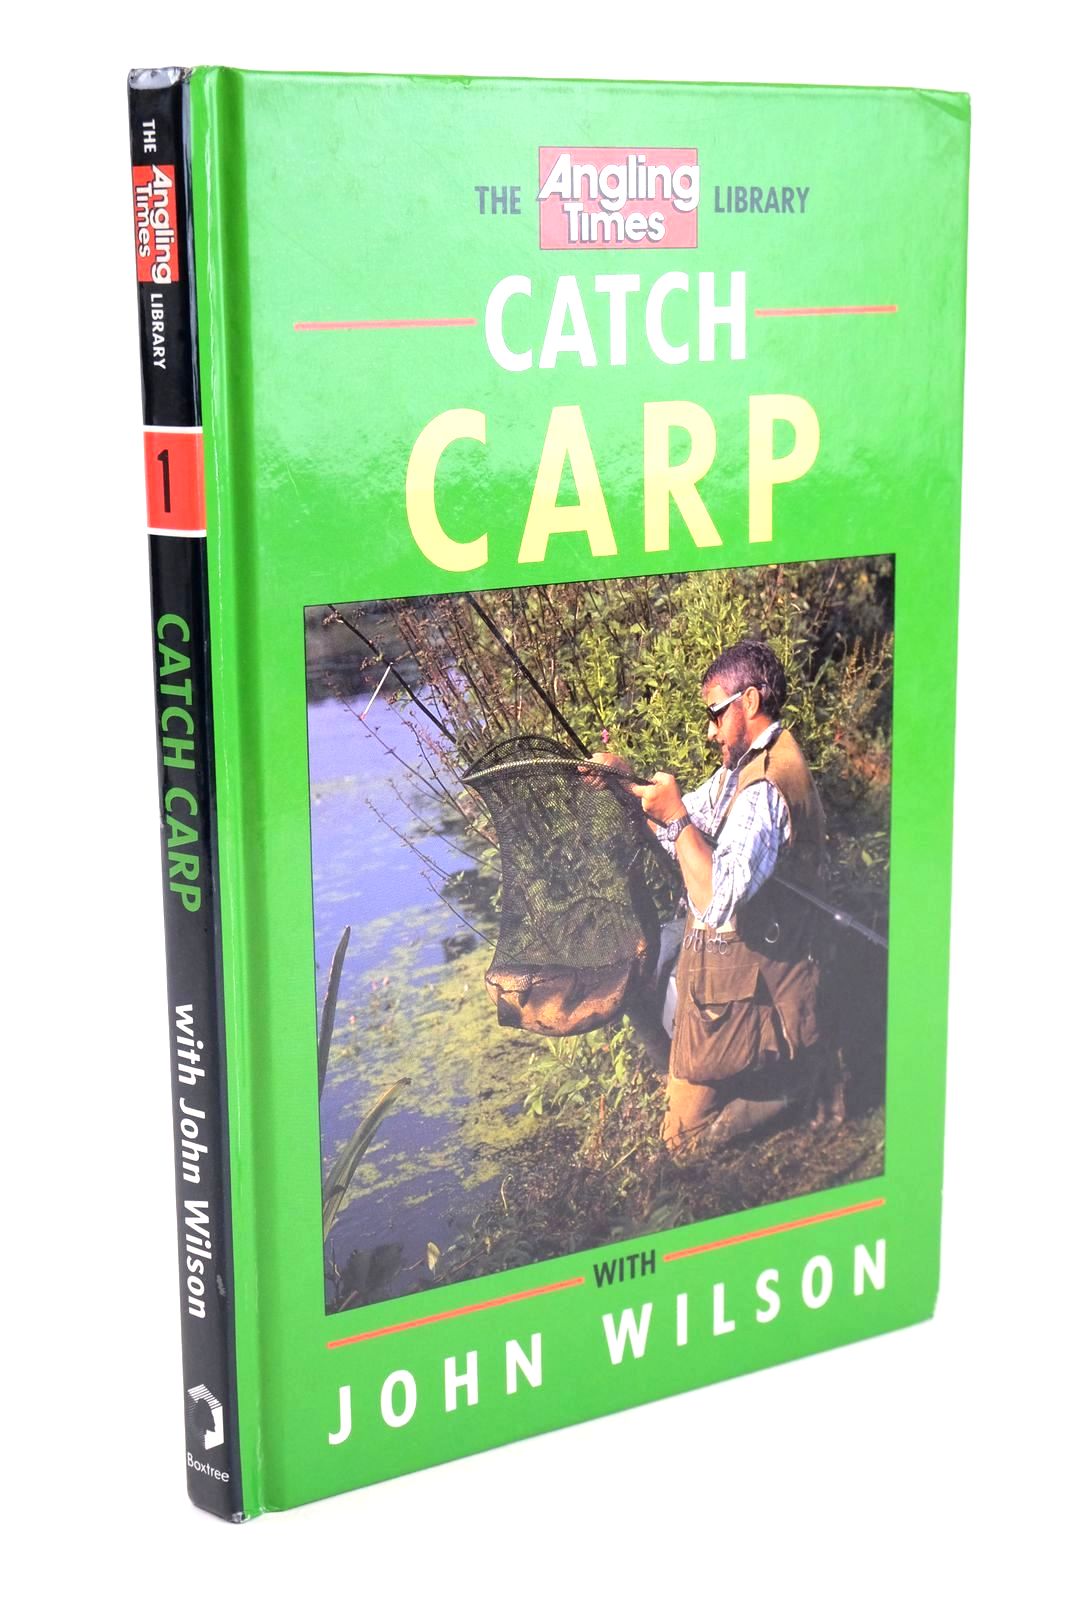 Photo of CATCH CARP written by Wilson, John published by Boxtree (STOCK CODE: 1327606)  for sale by Stella & Rose's Books